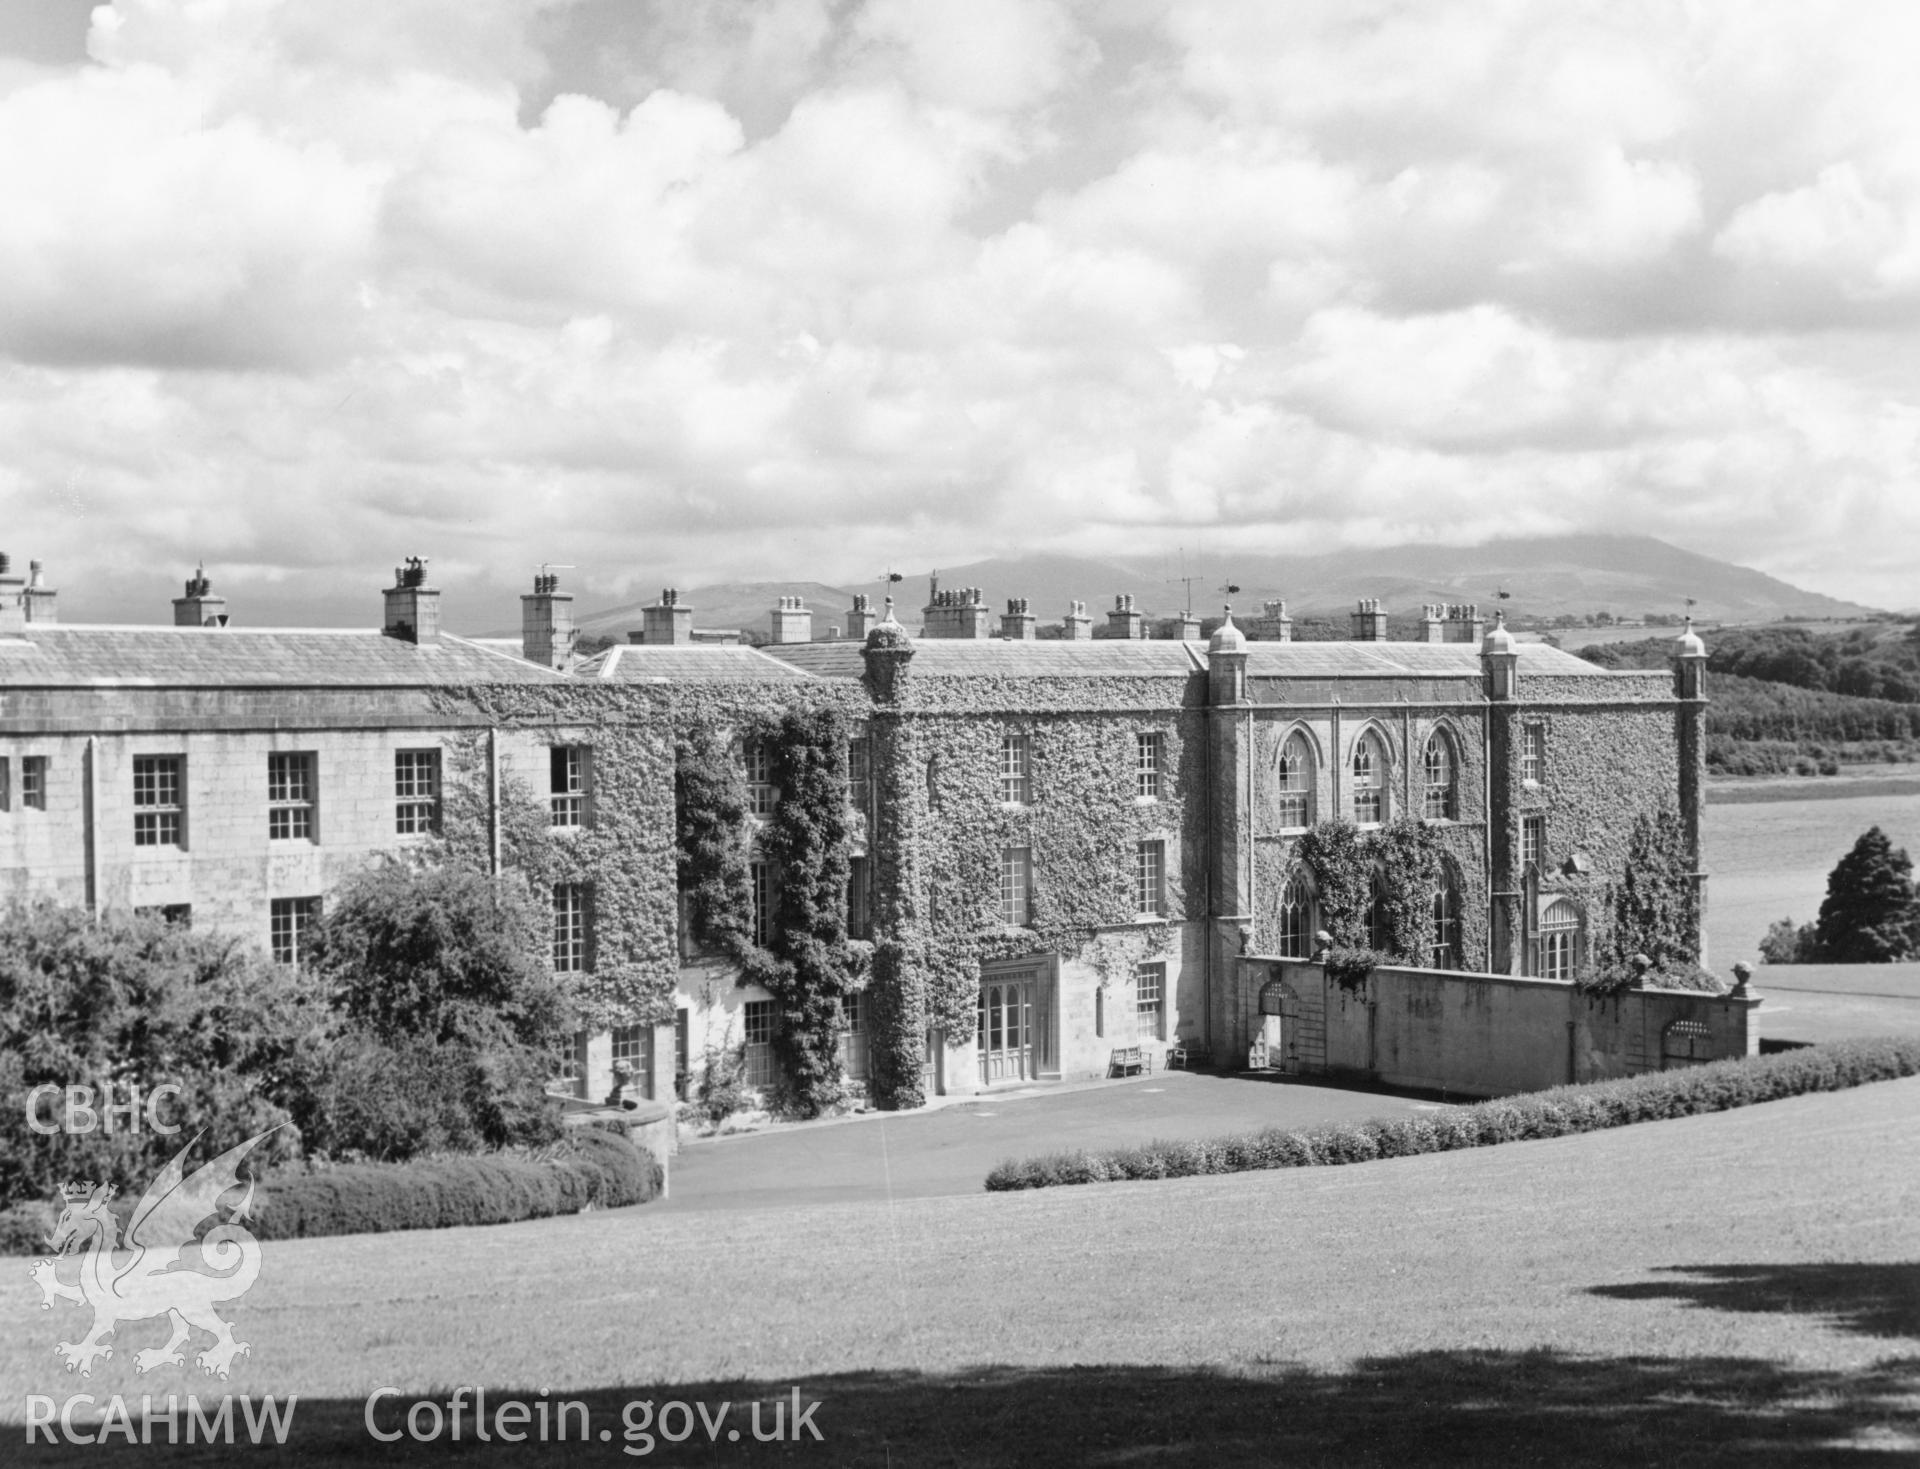 1 b/w print showing view of Plas Newydd House, Anglesey; collated by the former Central Office of Information.